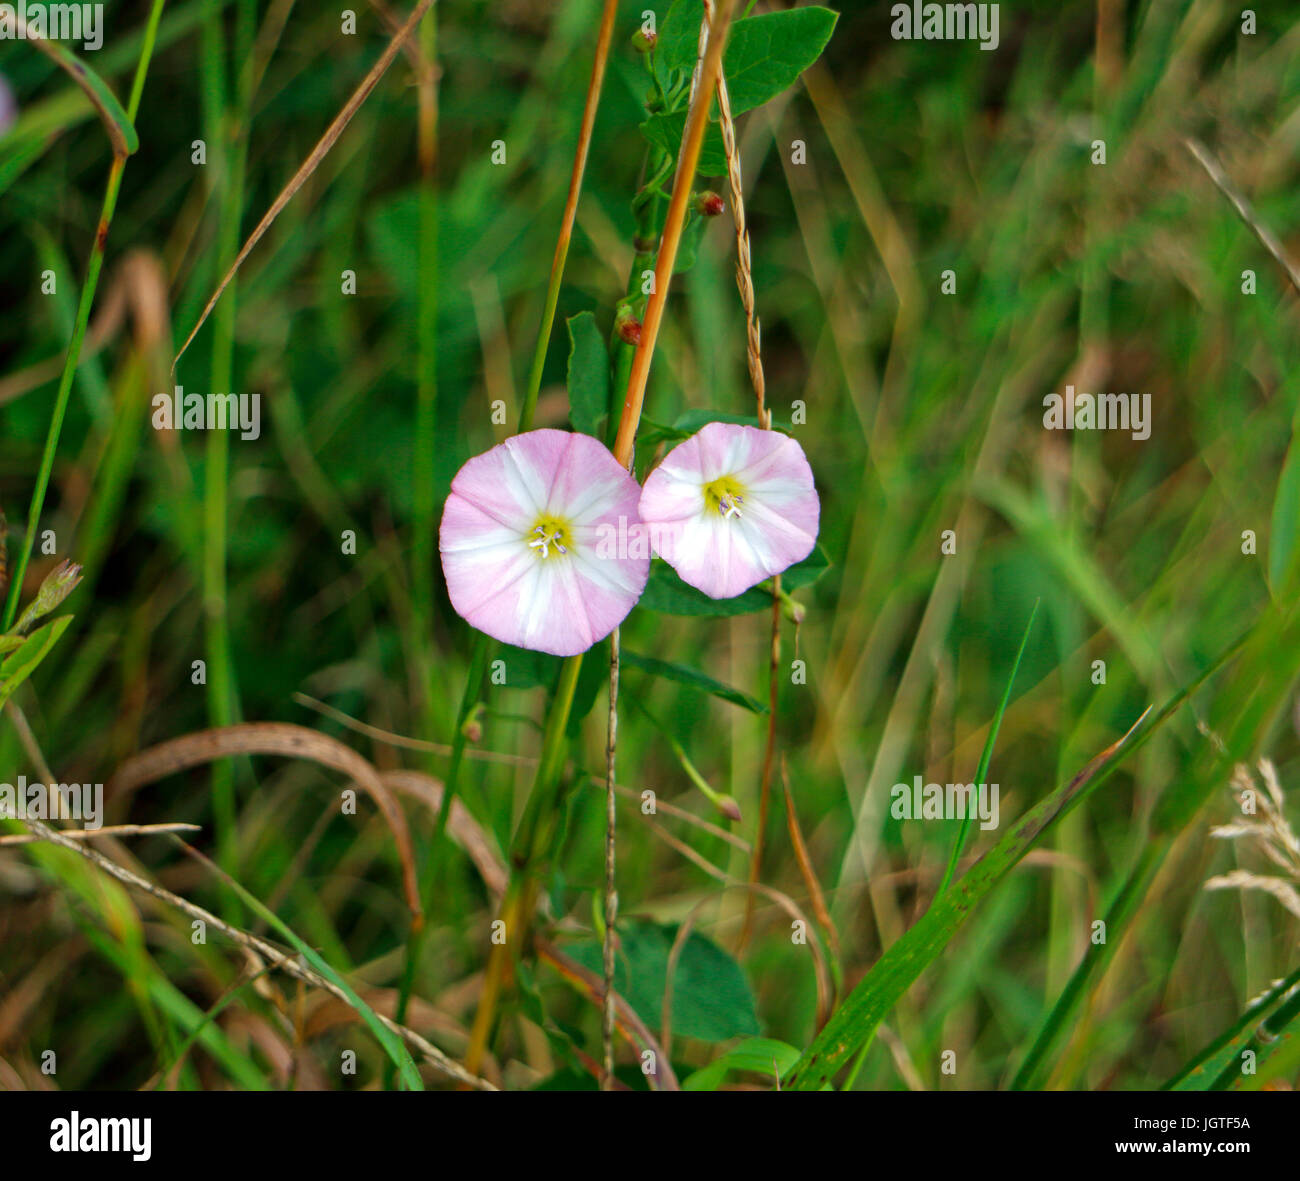 A pair of flowers of Field Bindweed, Convolvulus arvensis. Stock Photo